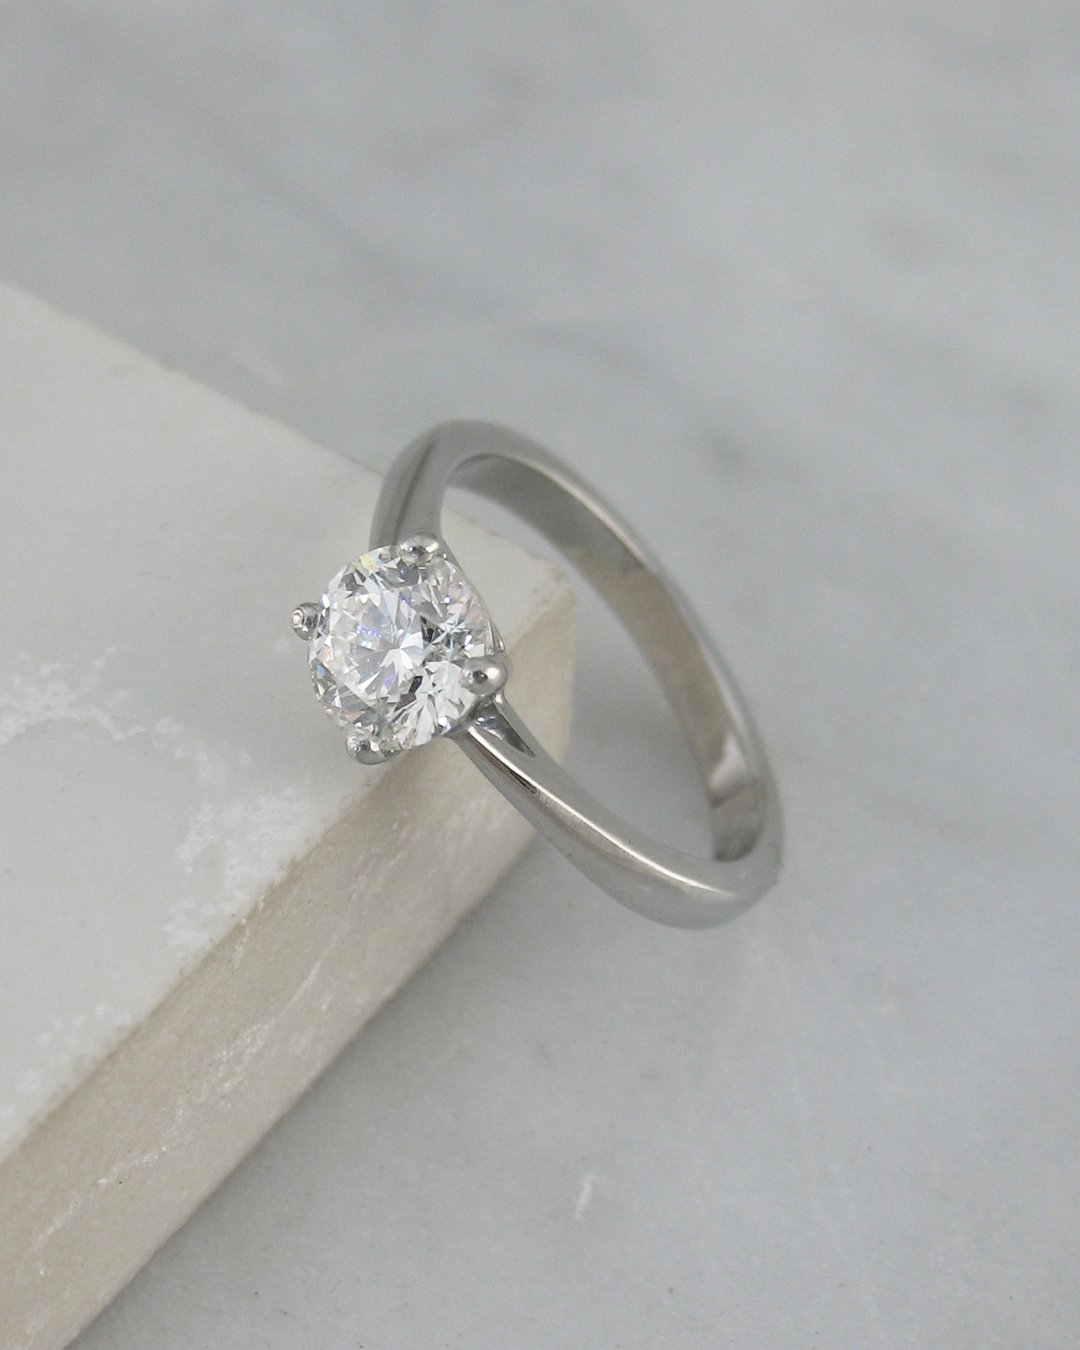 A traditional solitaire diamond engagement ring